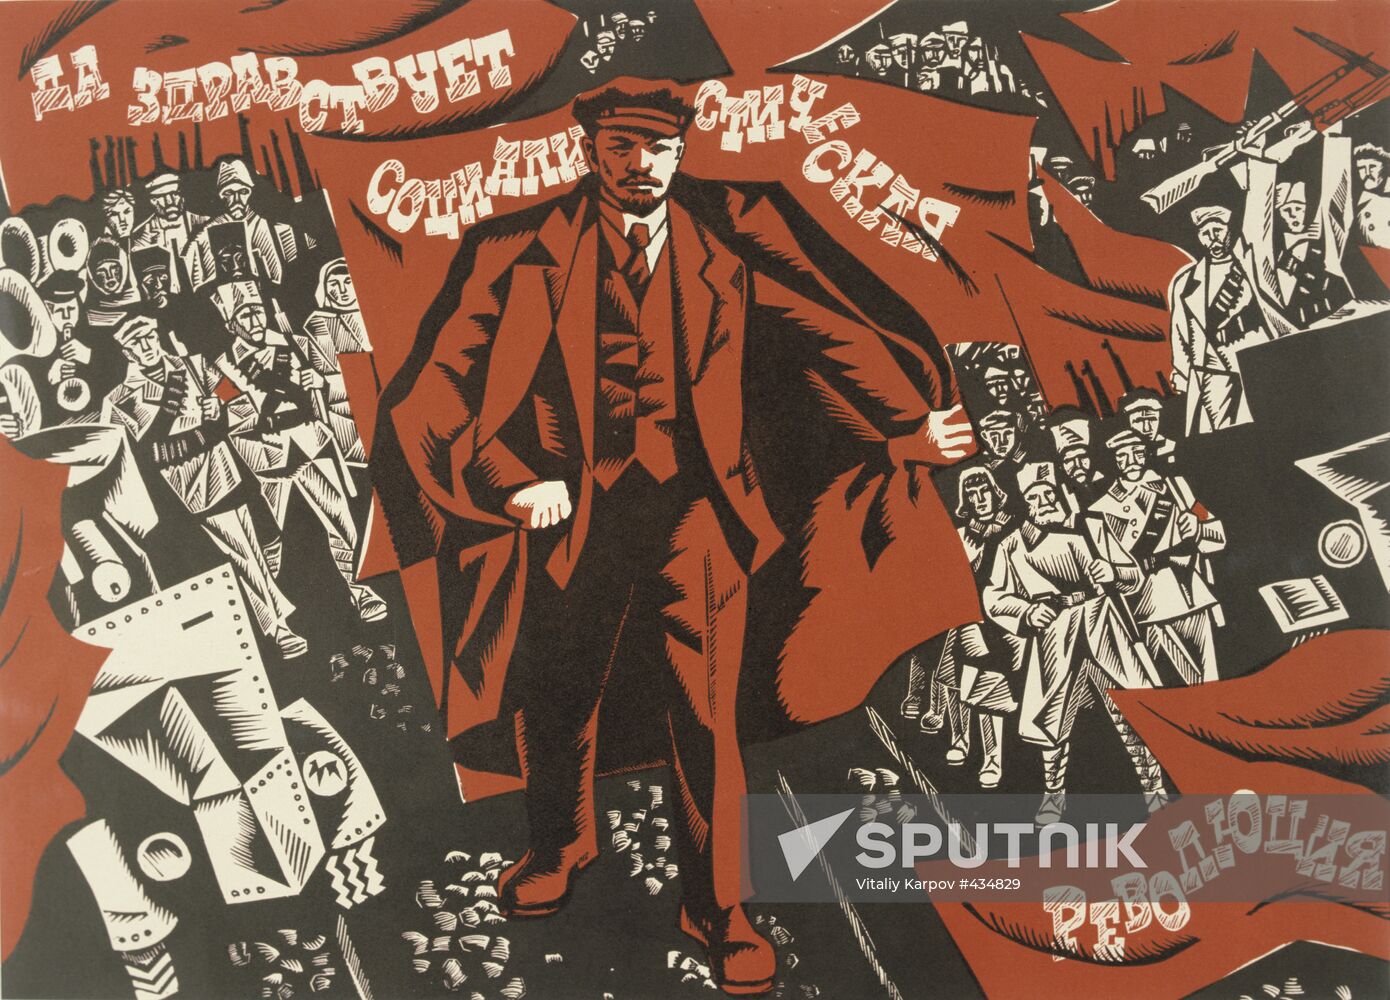 Reproduction of "Long Live to Socialist Revolution!" poster